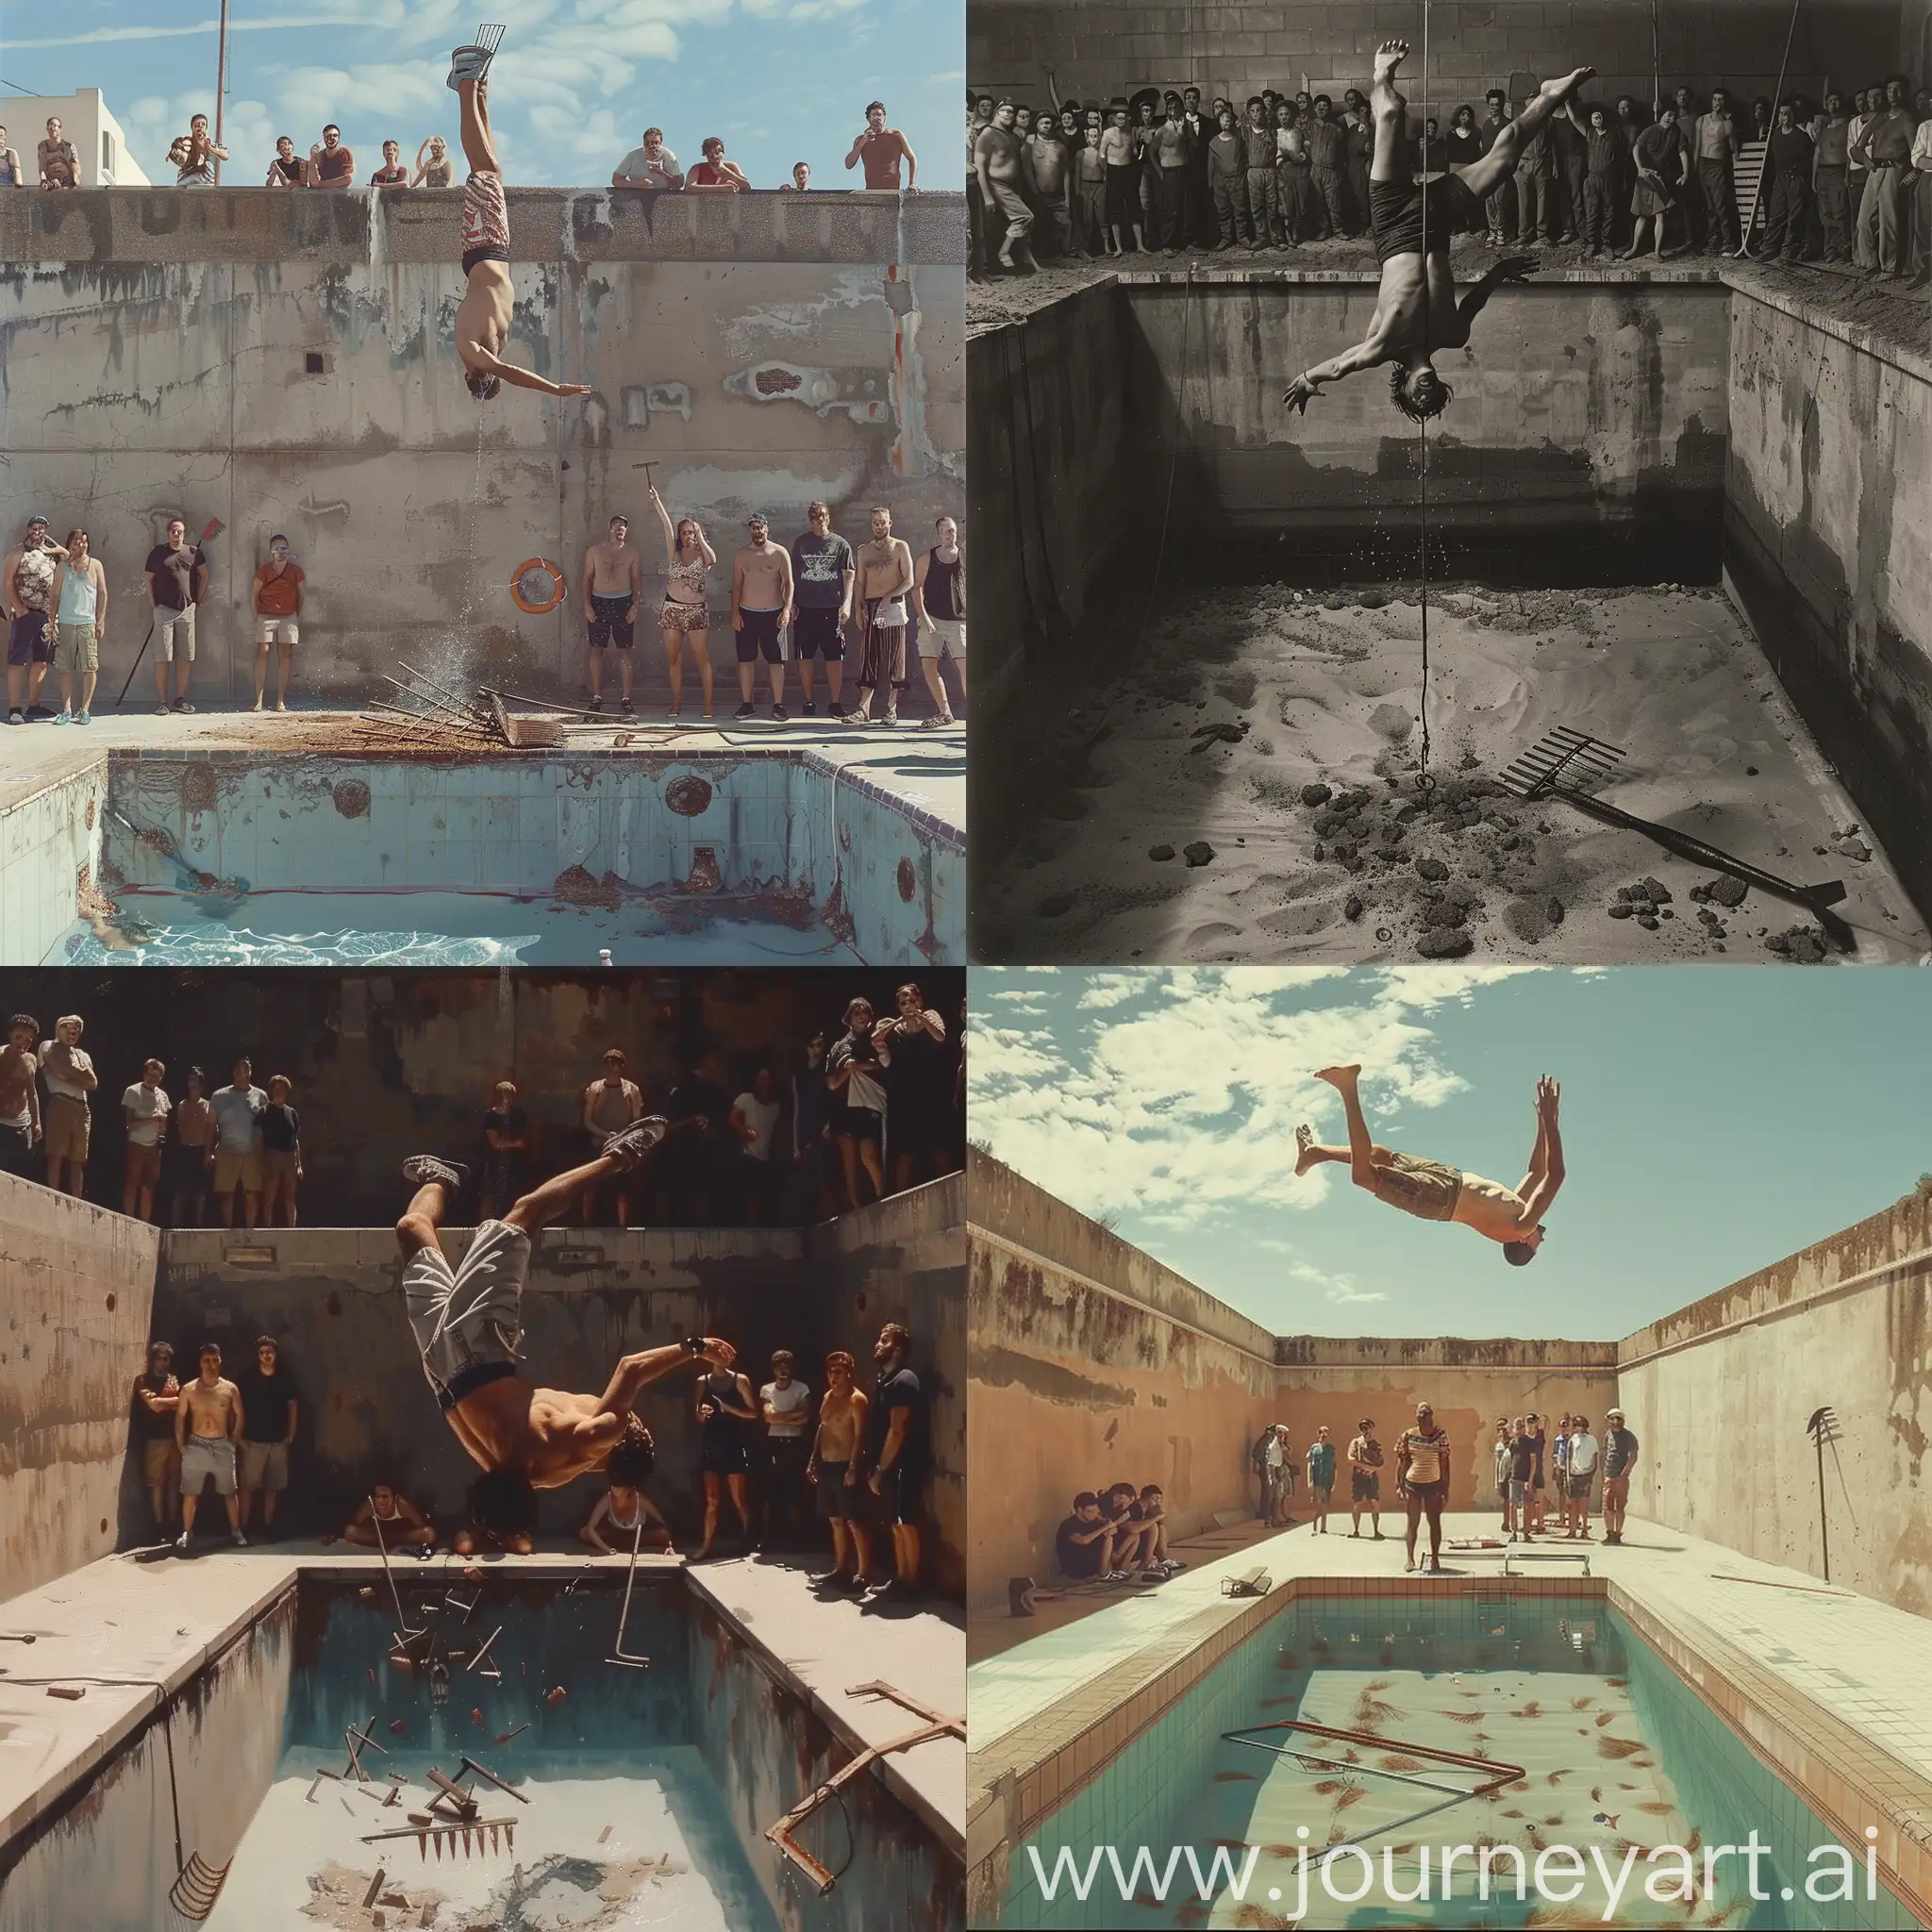 Man-Performing-Acrobatic-Dive-into-Empty-Pool-with-Rake-Scattered